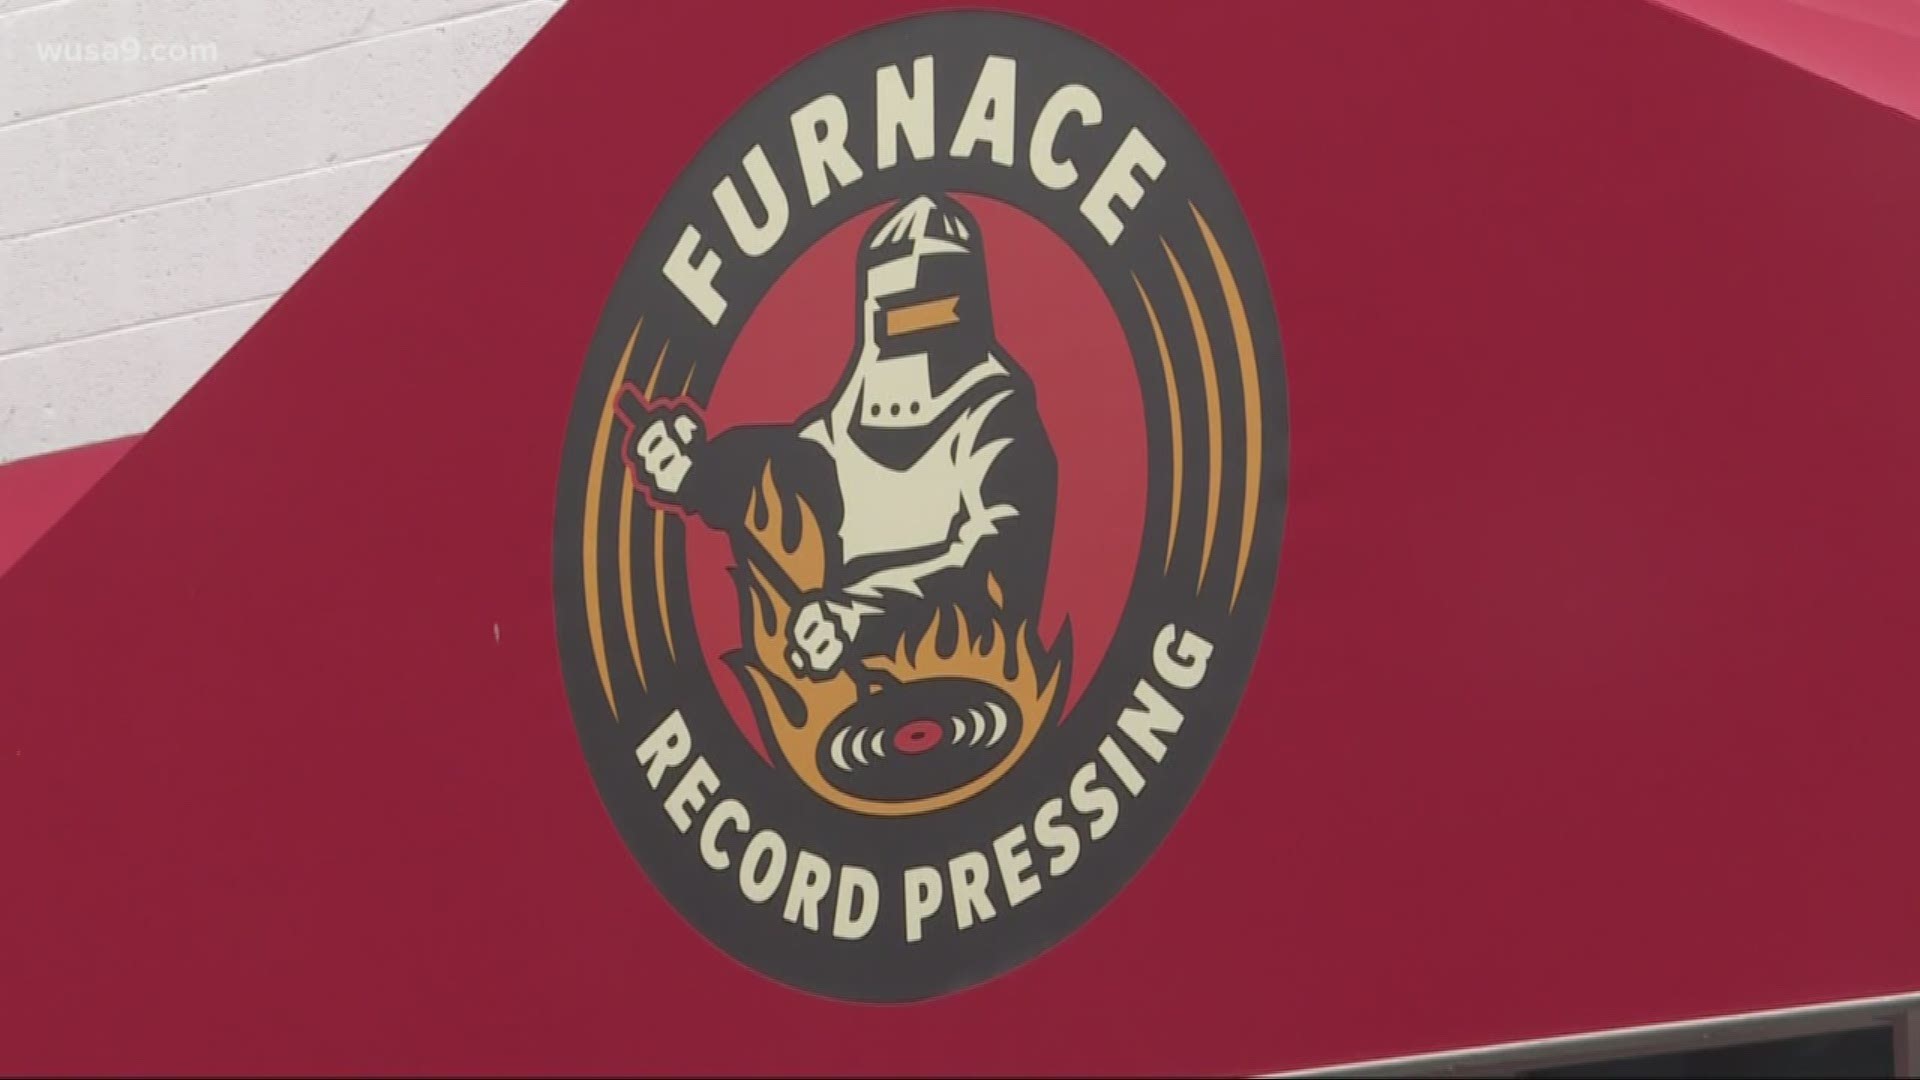 Talk about throwback Thursday. This local company is still making vinyl records.